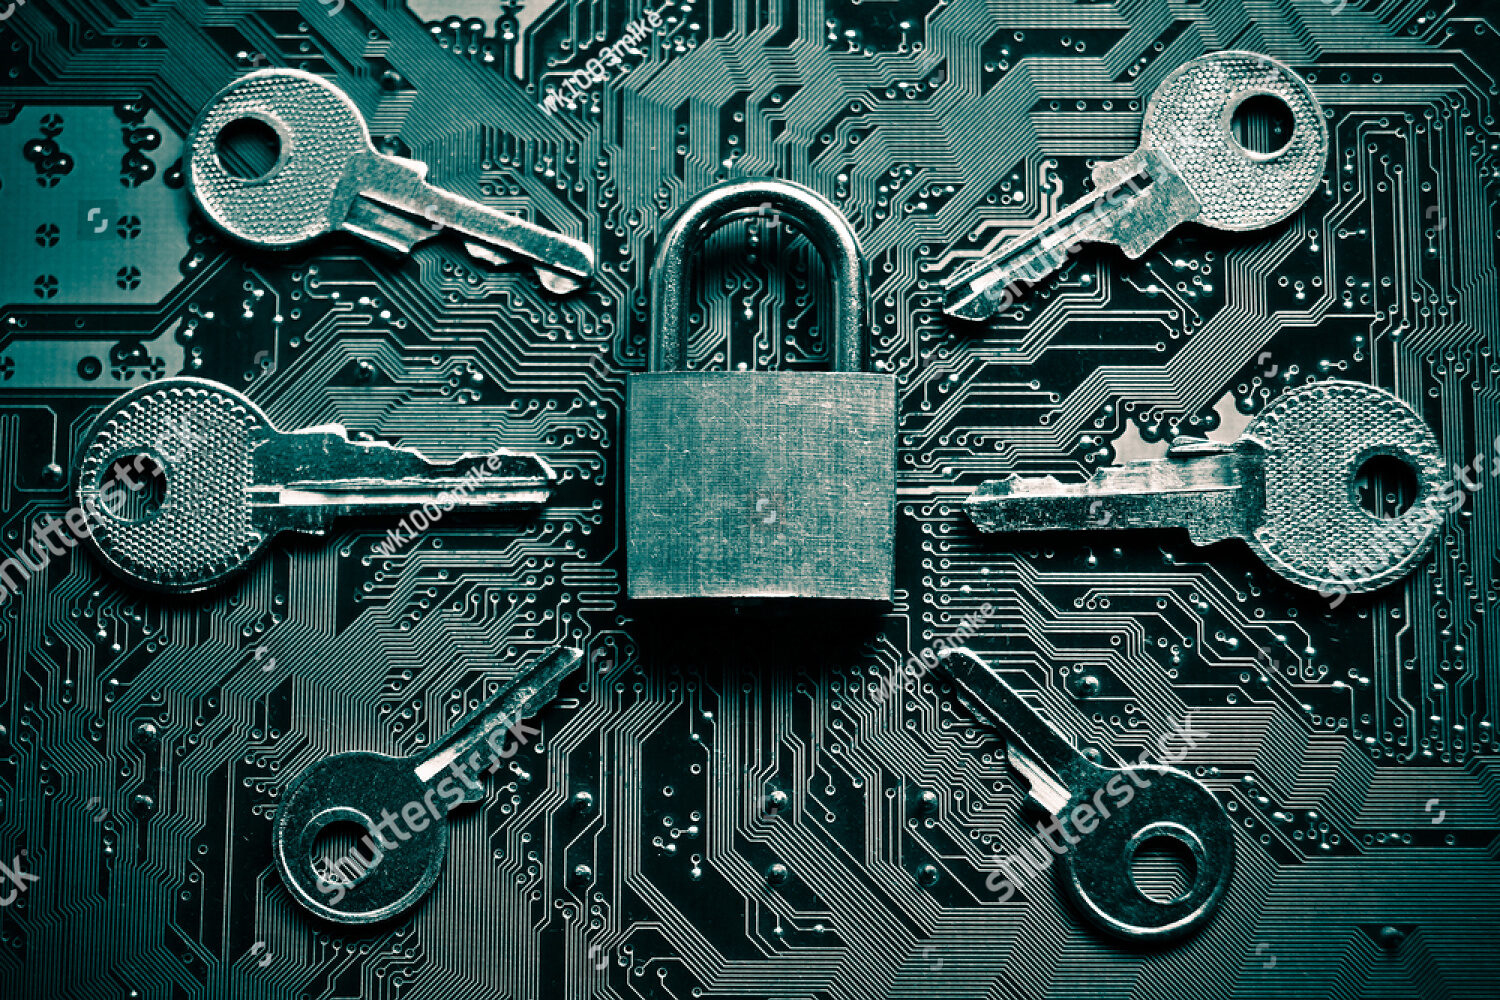 Image of lock and keys over circuit board